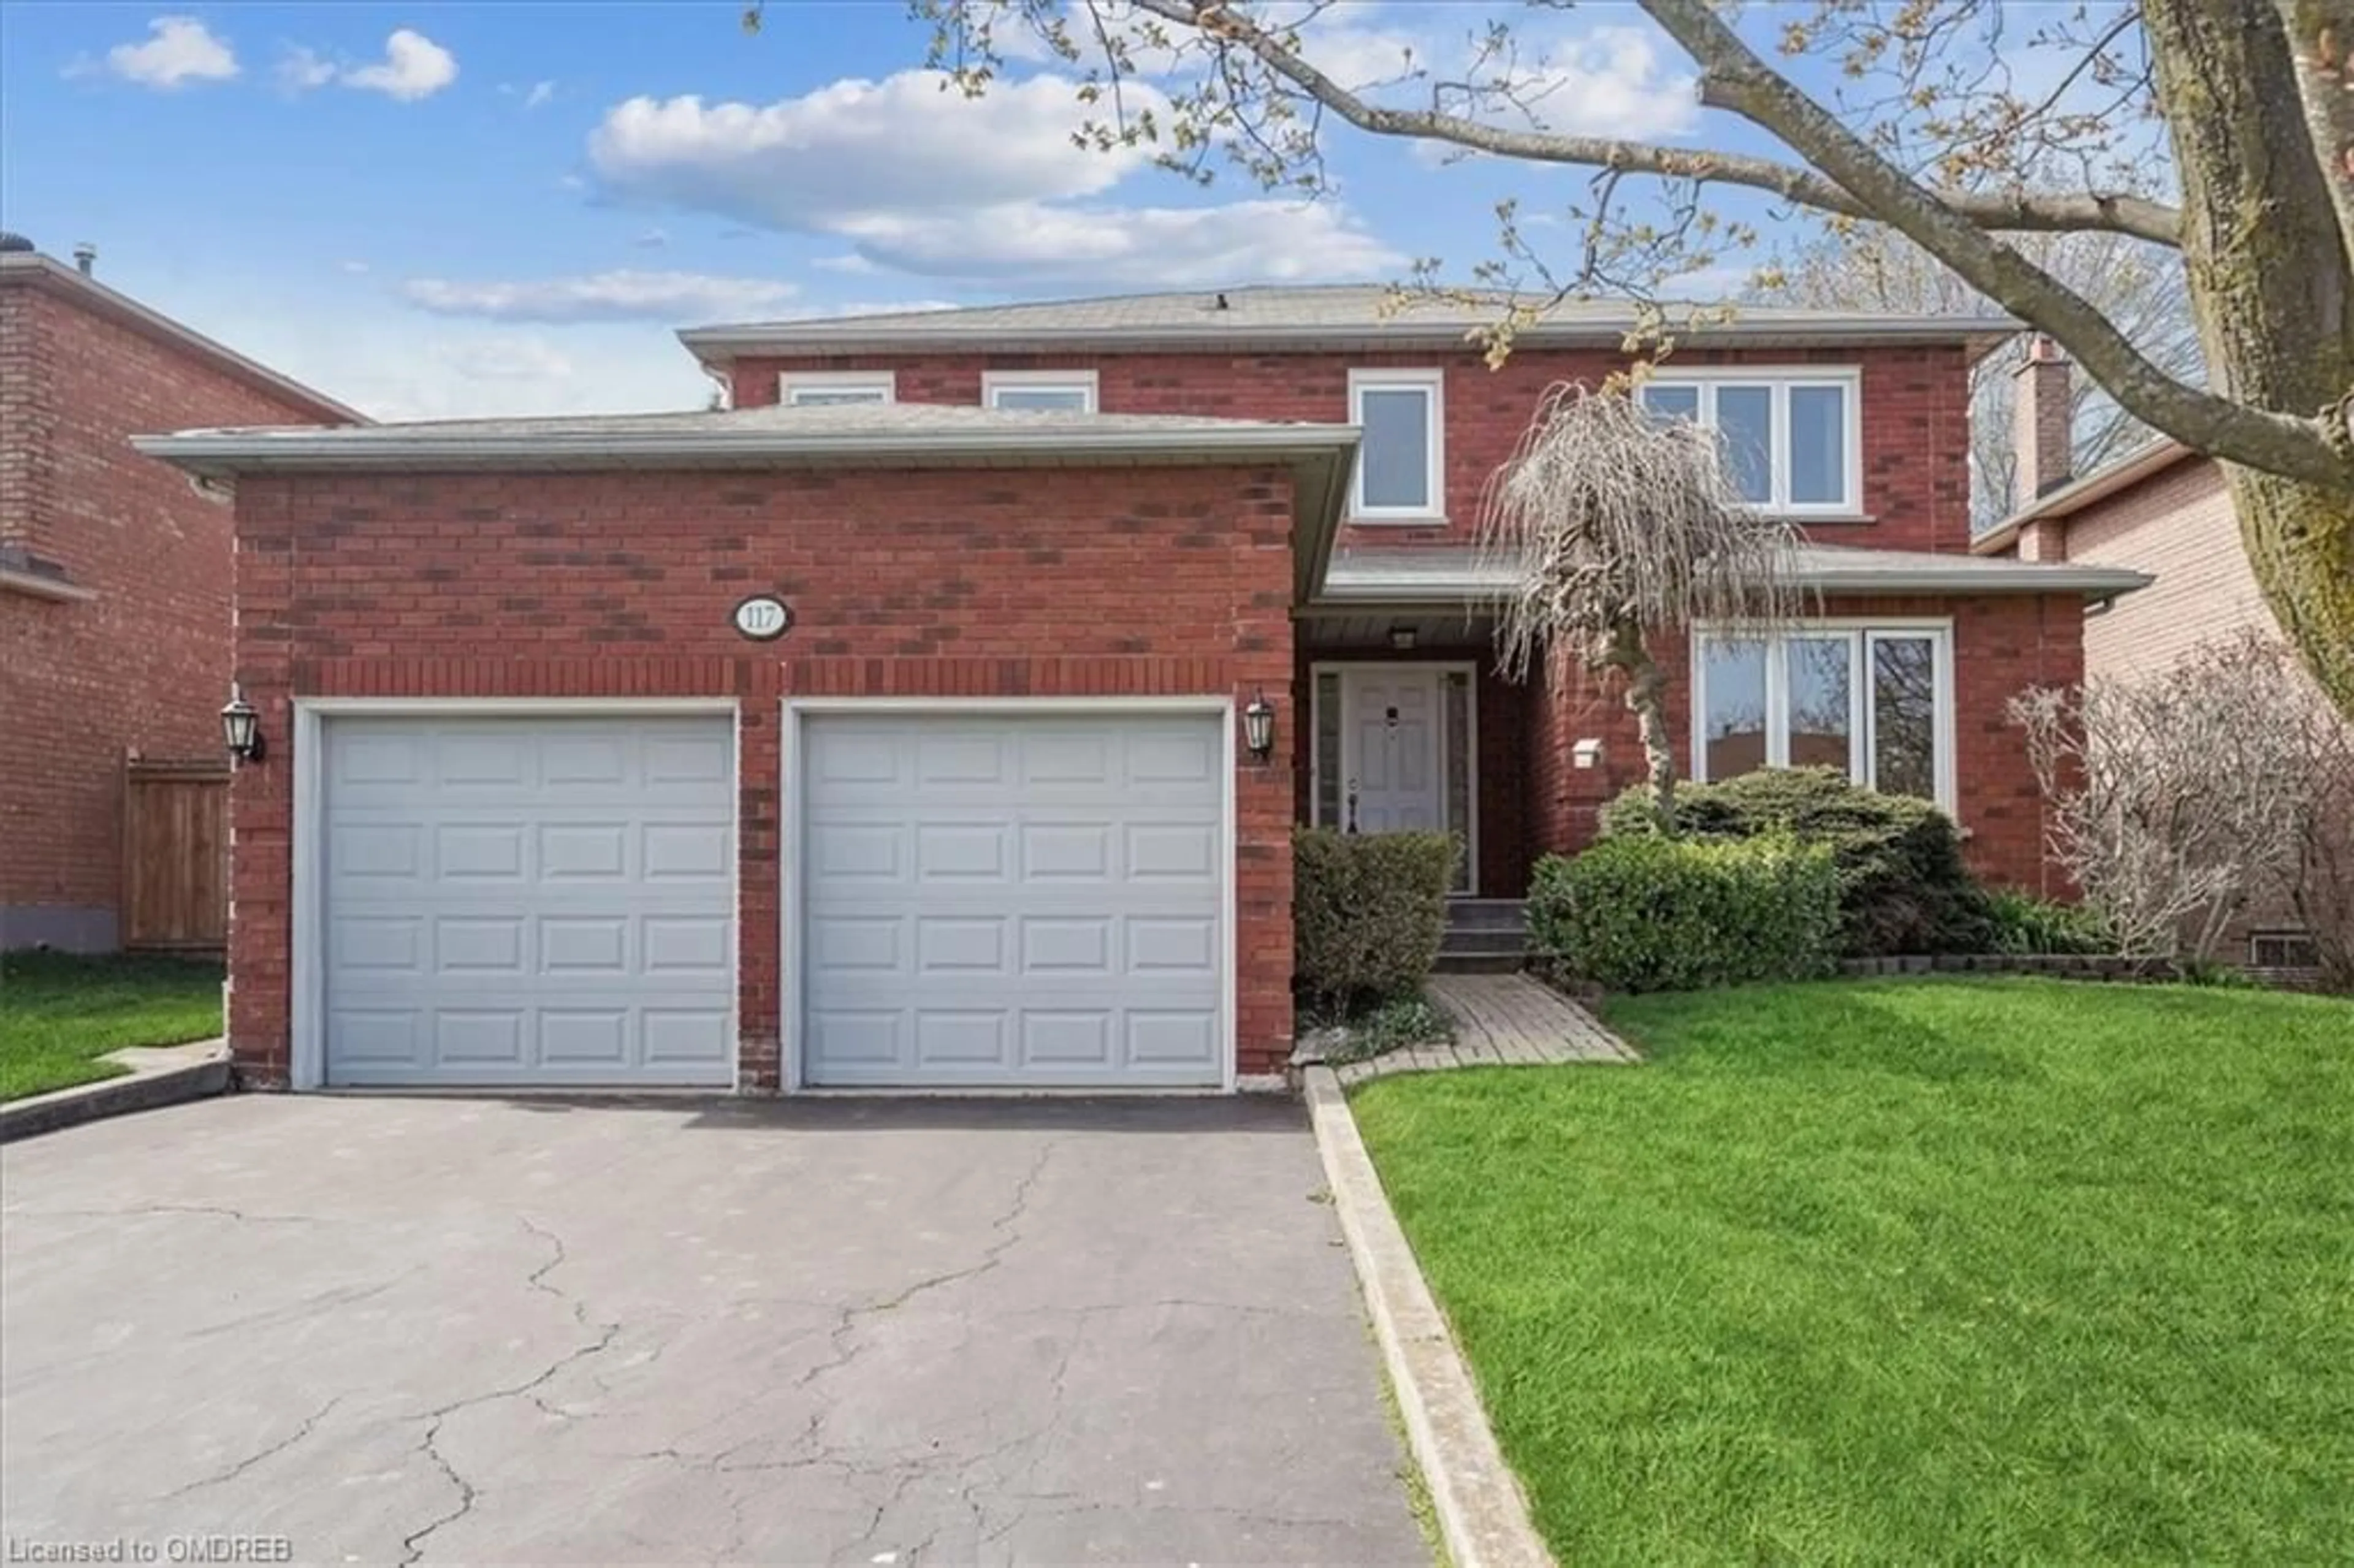 Home with brick exterior material for 117 Warner Dr, Oakville Ontario L6L 6G7